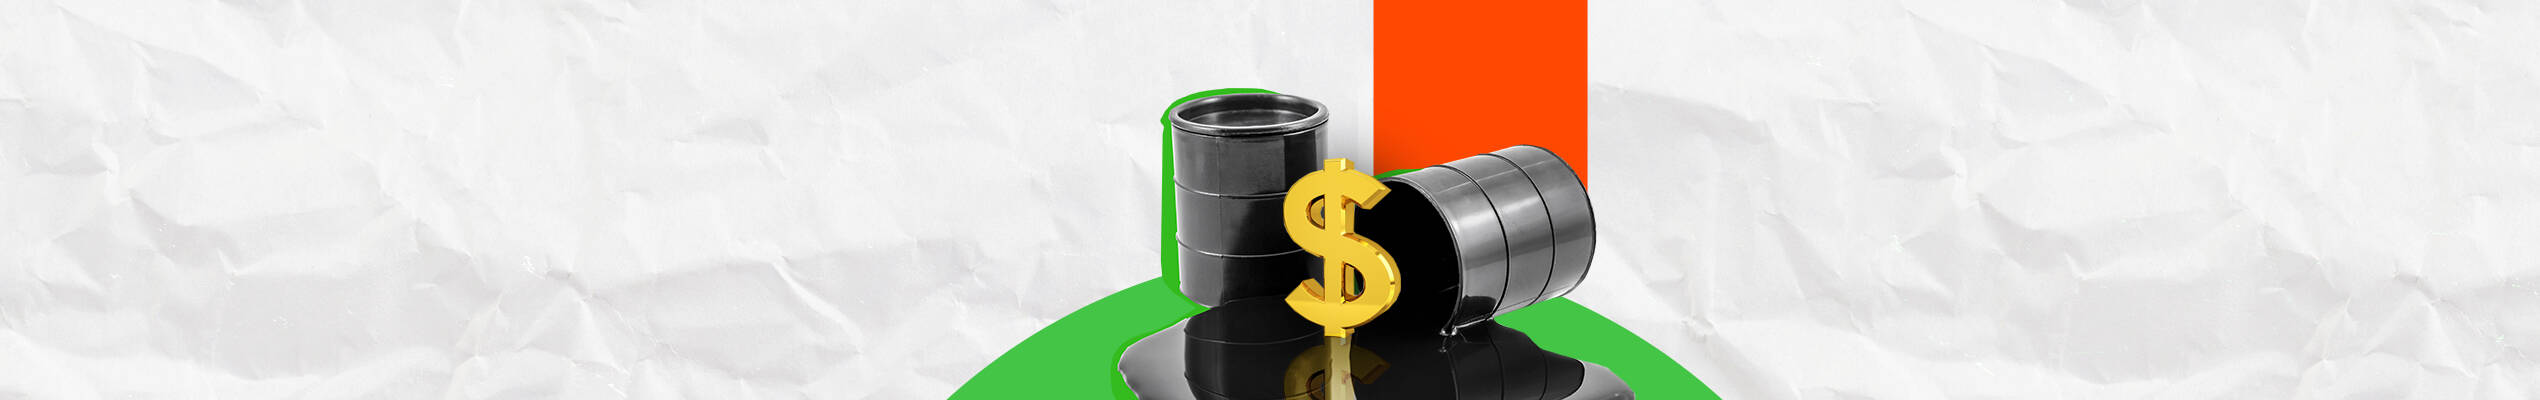 Wall St banks forecast oil at $100